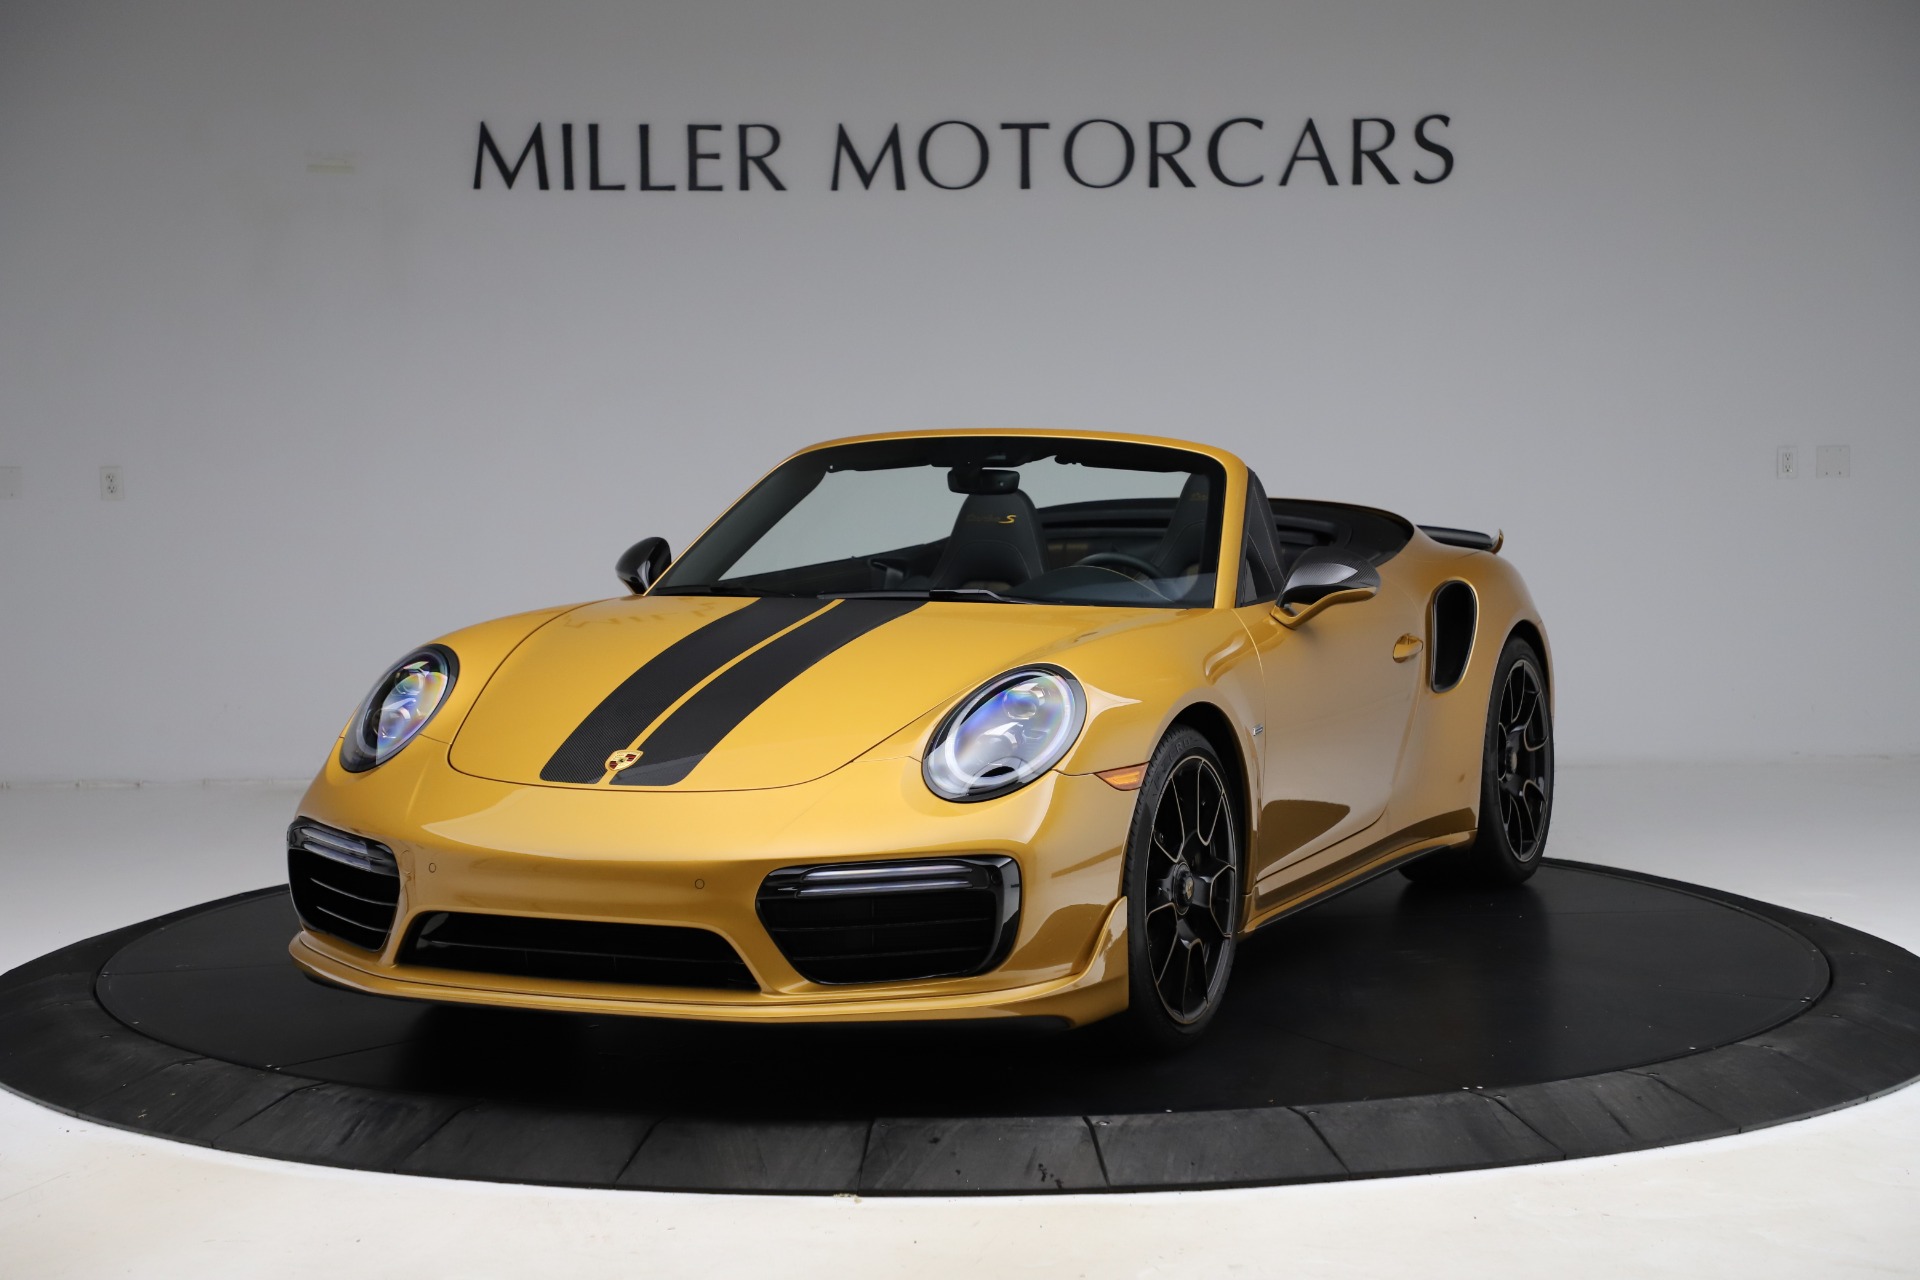 Used 2019 Porsche 911 Turbo S Exclusive for sale Sold at Aston Martin of Greenwich in Greenwich CT 06830 1